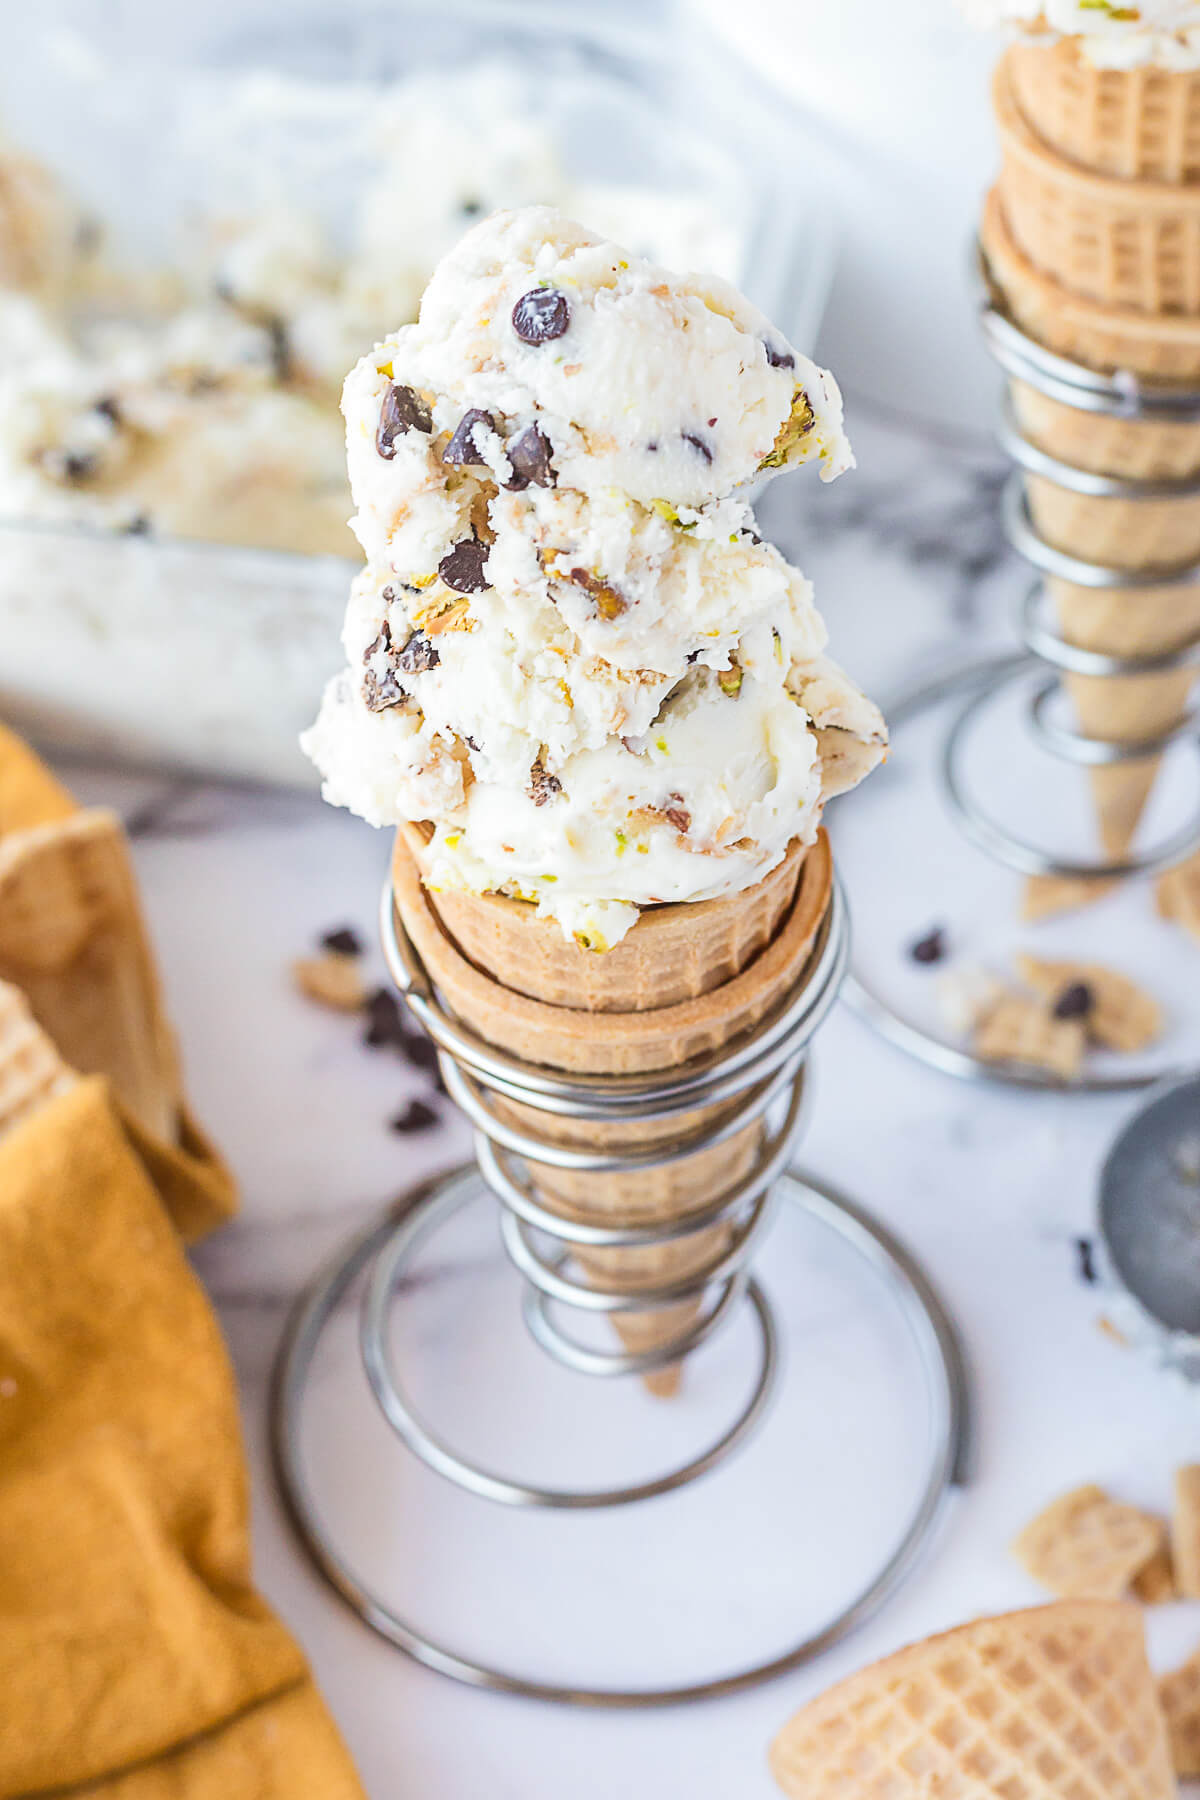 A sugar cone filled with two scoops of white vanilla ice cream dotted with chocolate chips, pistachios, and broken sugar cone bits.